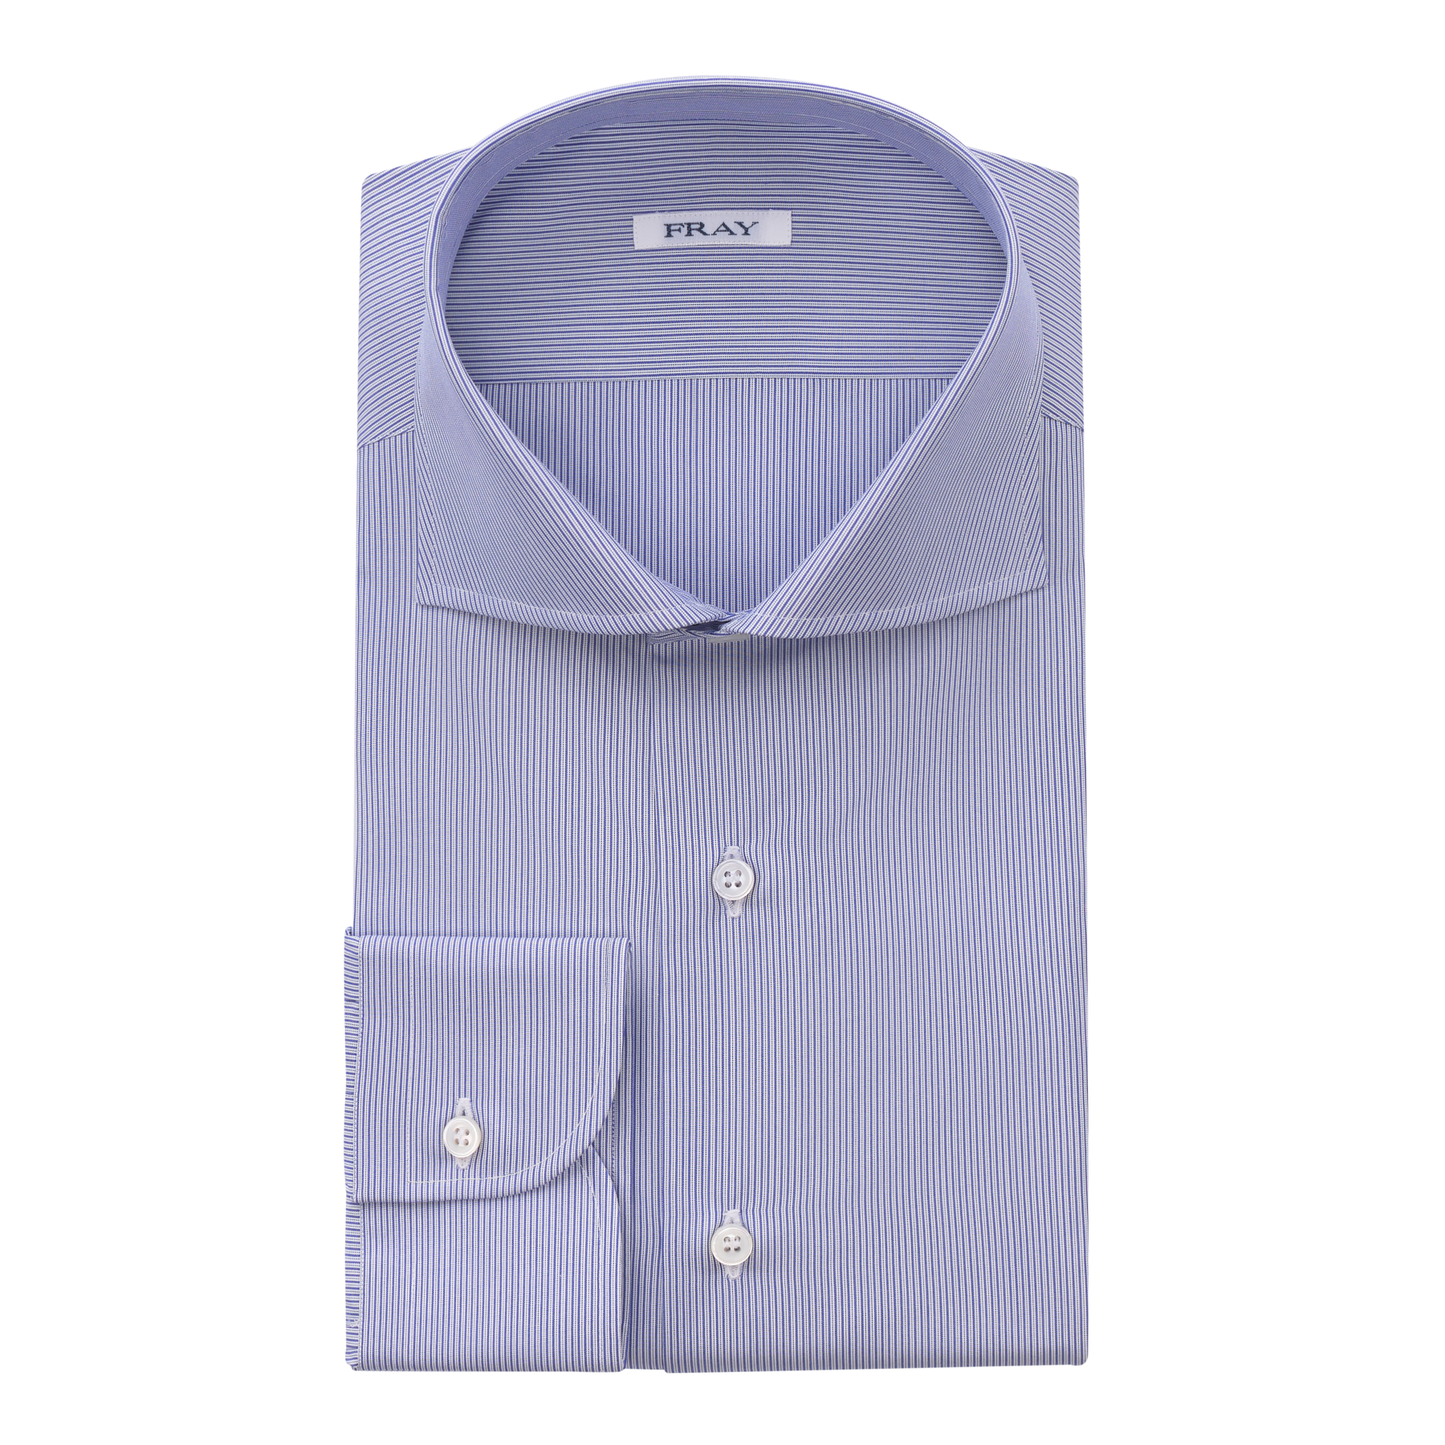 Fray Pinstriped Cotton Shirt in White and Dark Blue - SARTALE